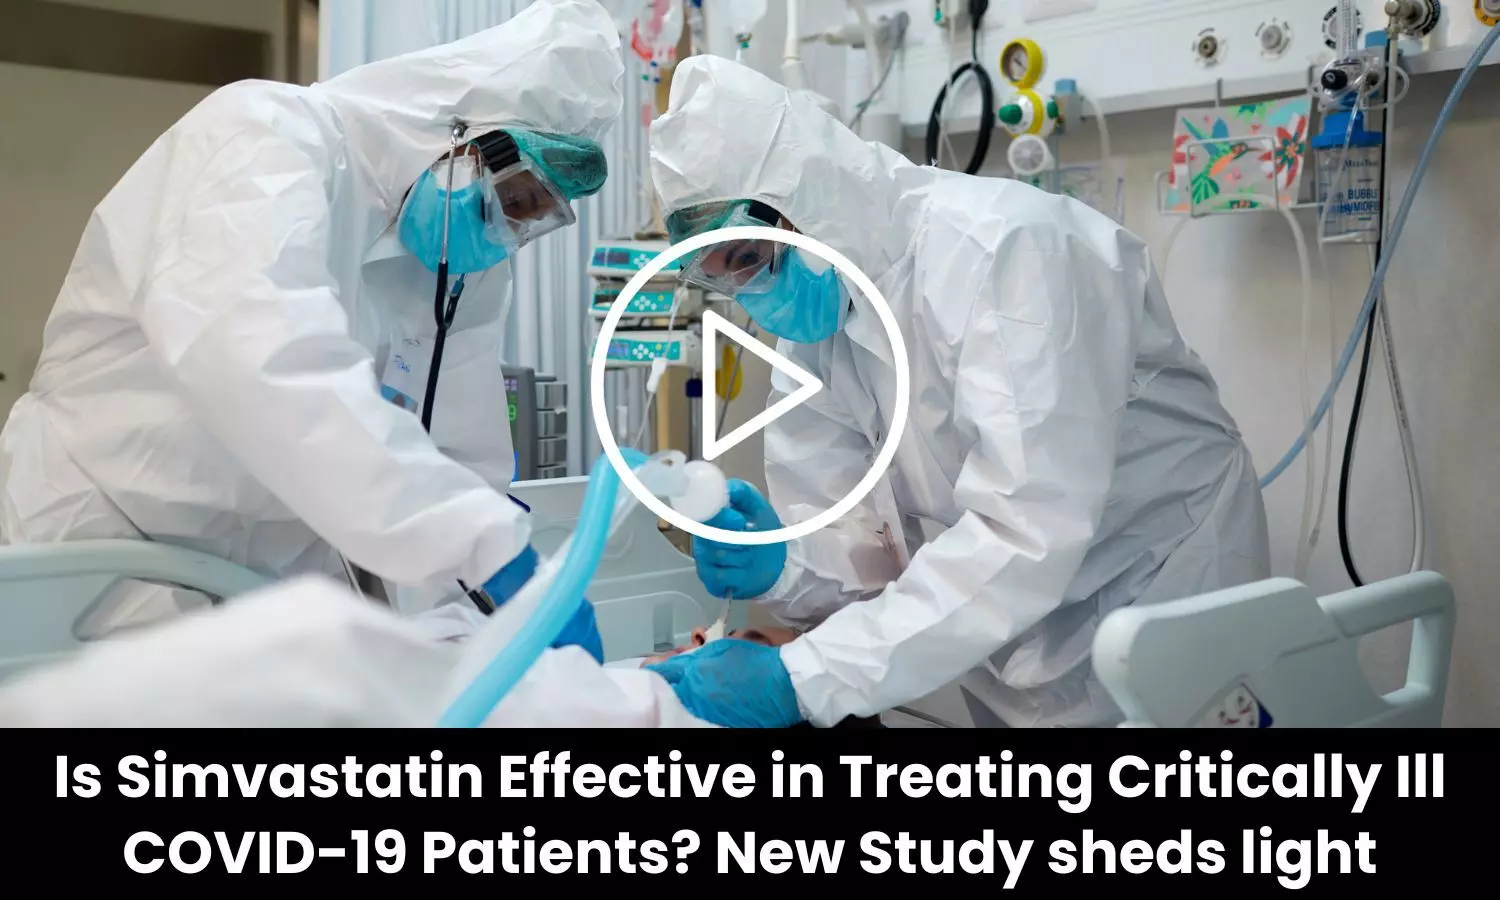 Is Simvastatin Effective in Treating Critically Ill COVID-19 Patients? New Study sheds light